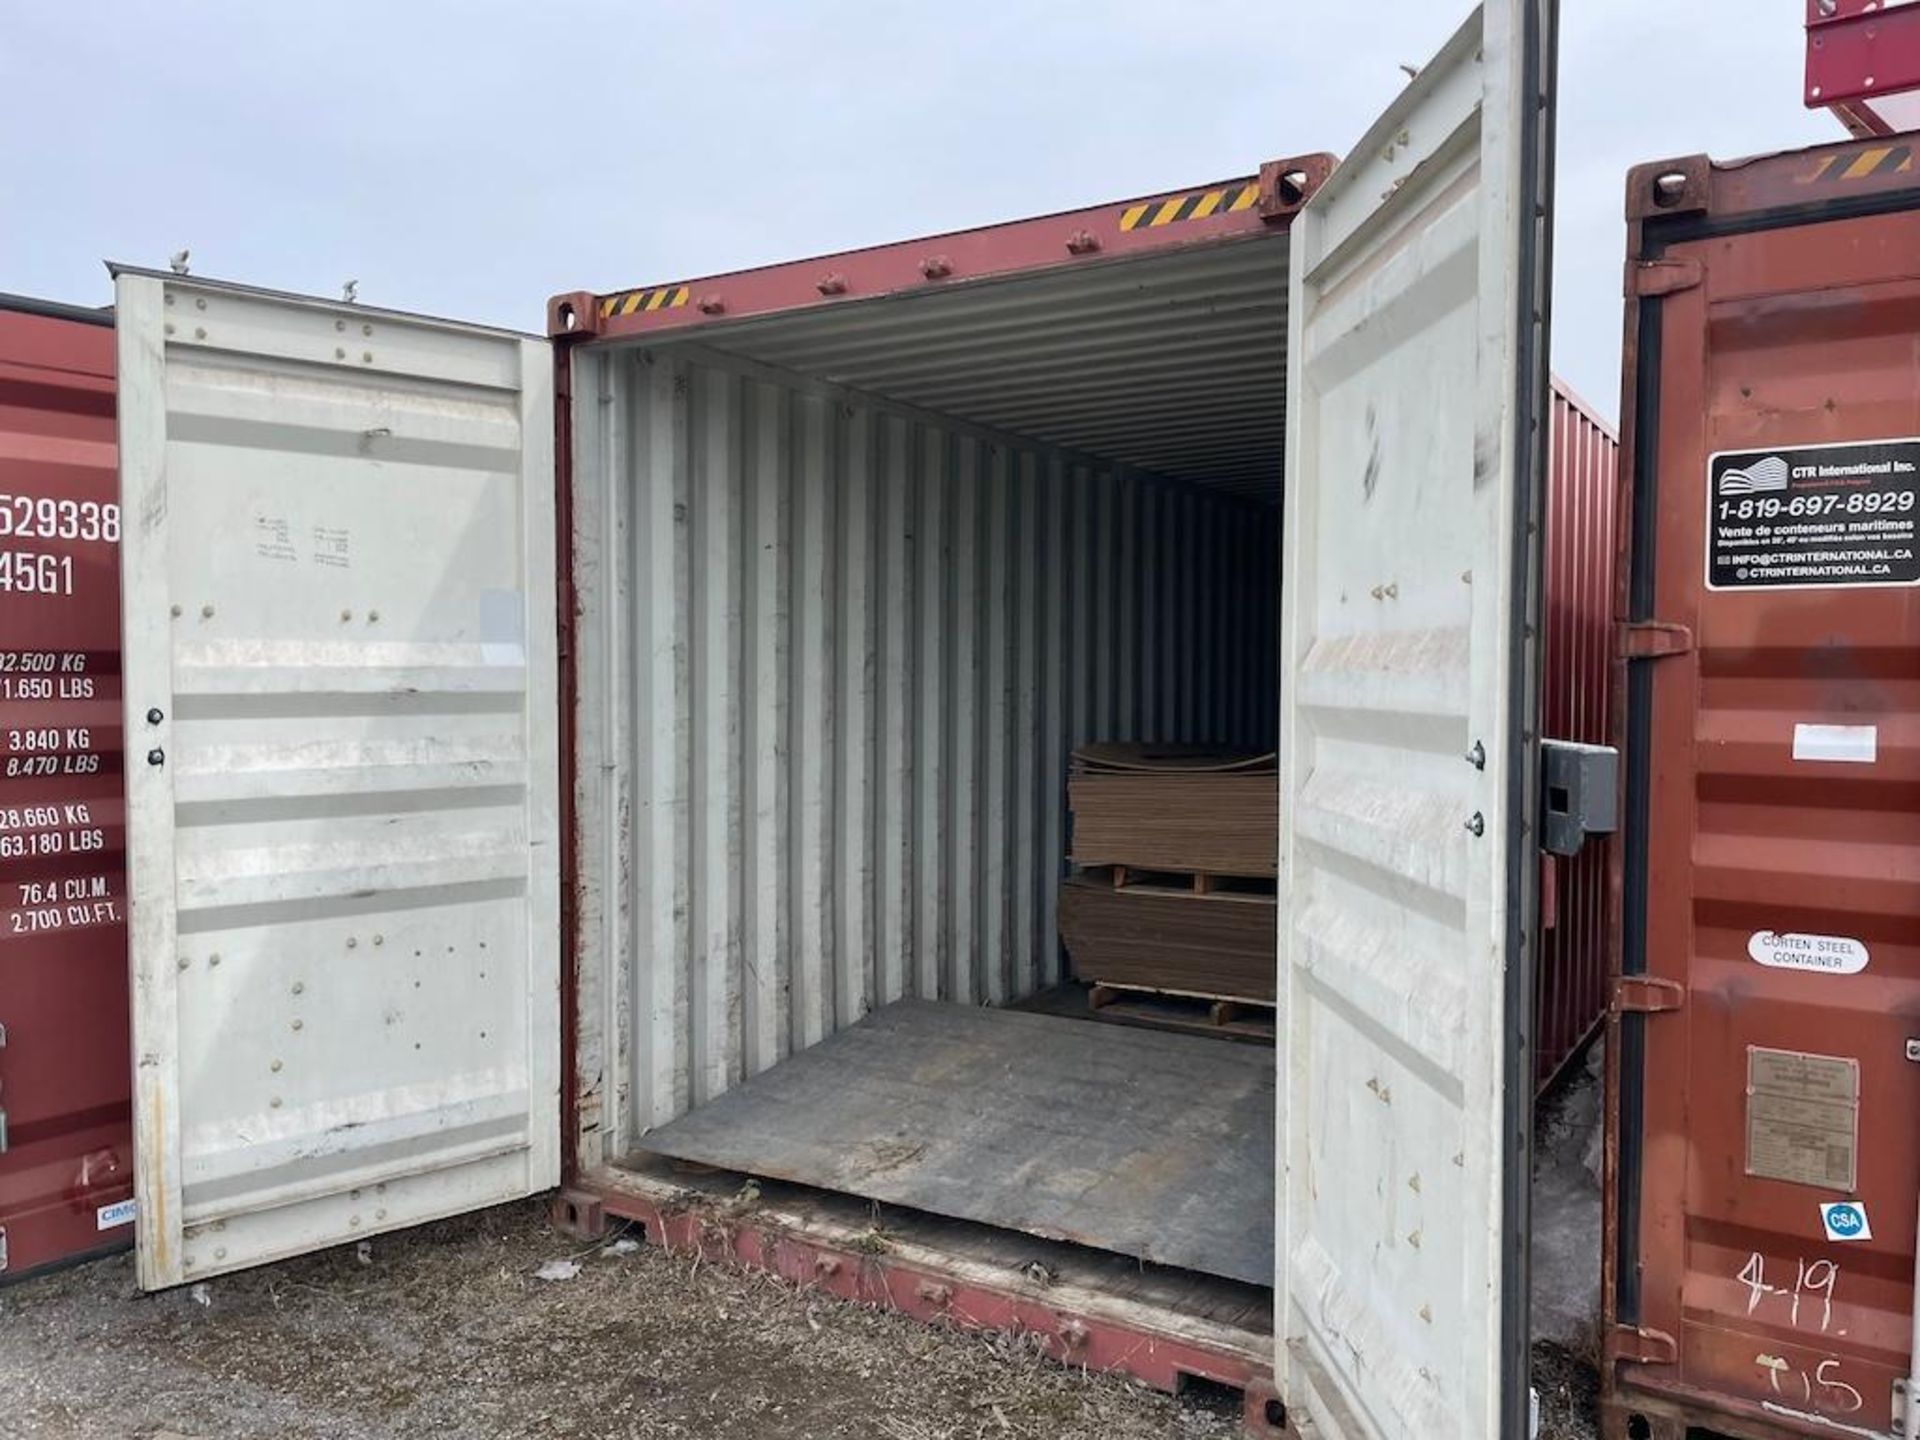 40 FT SEA CONTAINER, EXCLUDING CONTENTS, DELAYED PICK UP UNTIL MAY 13 [3] [TROIS RIVIERES] *PLEASE N - Image 2 of 4